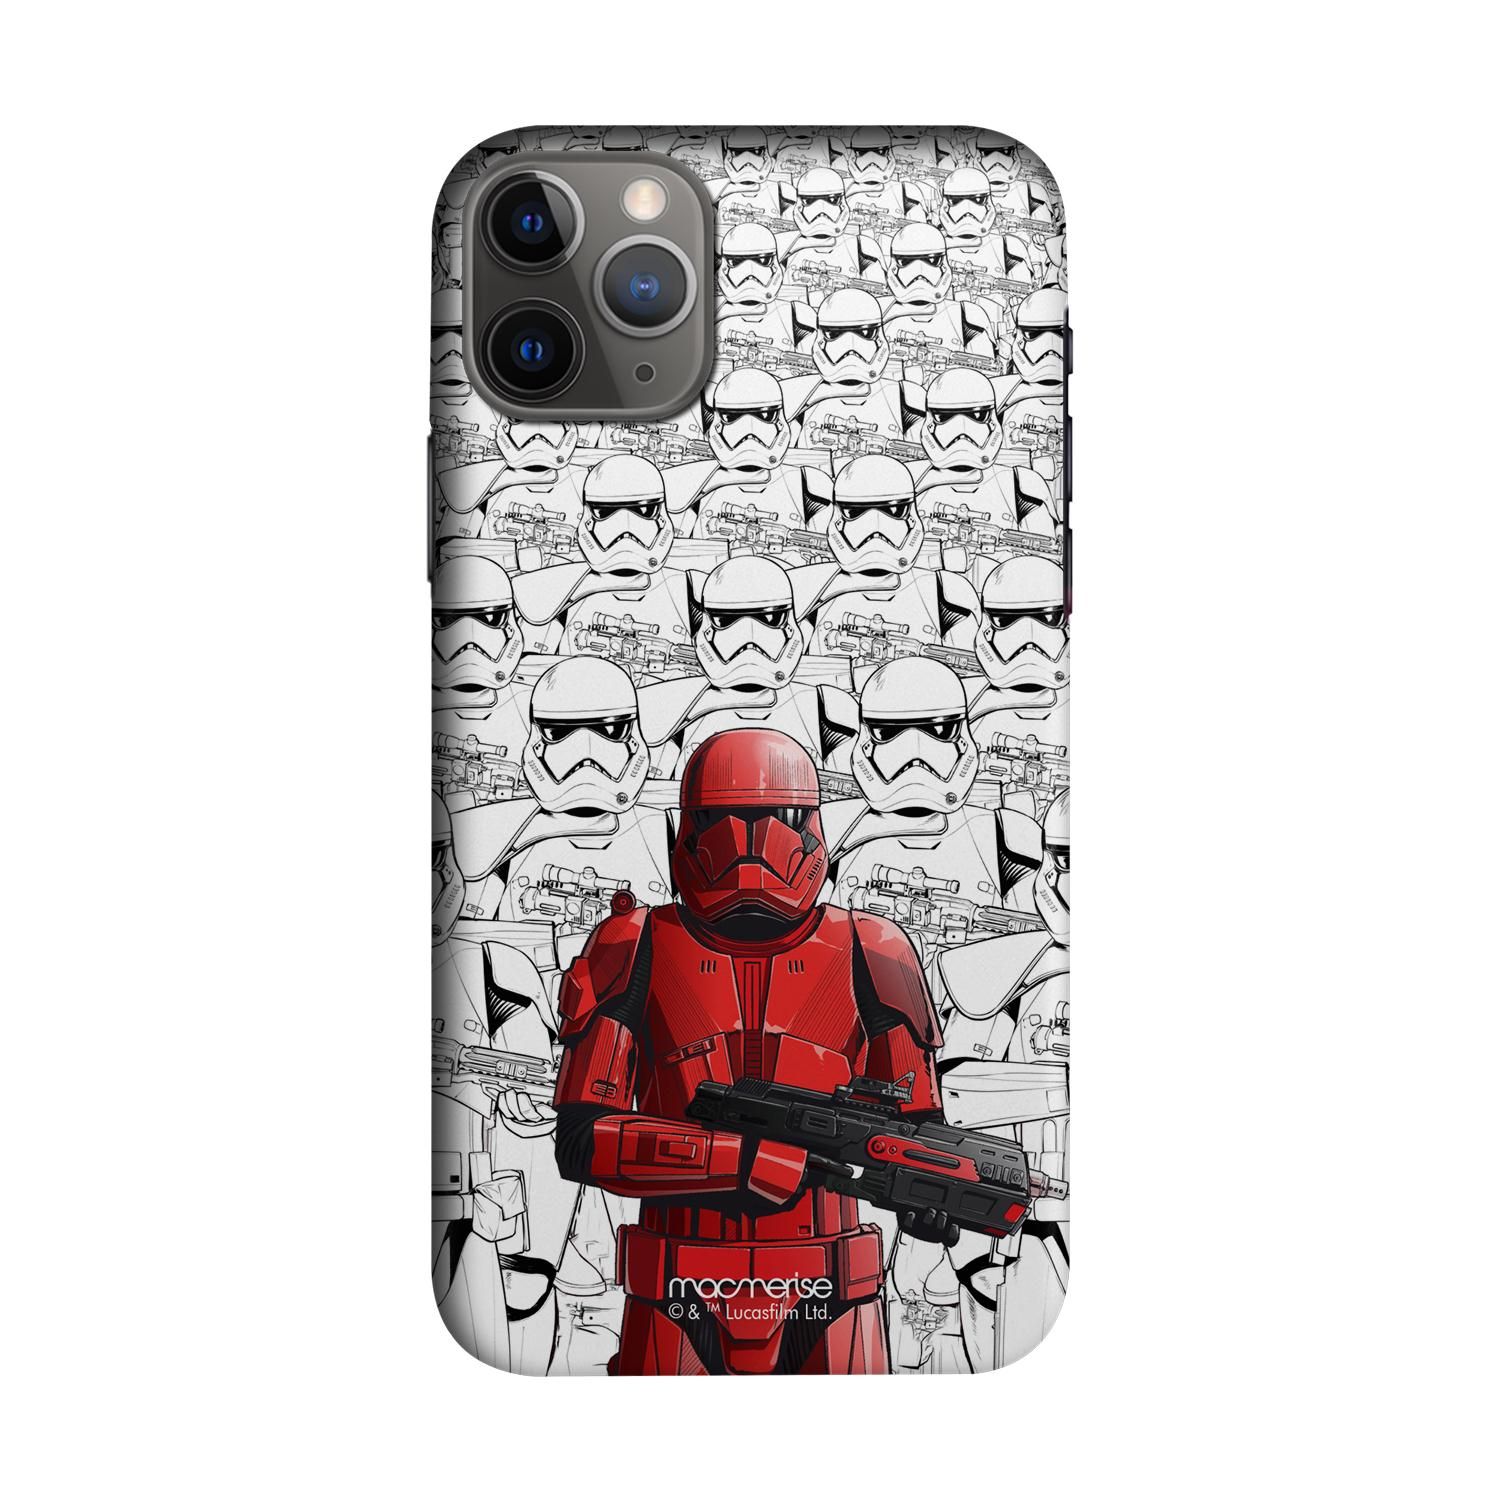 Buy Sith Troopers - Sleek Phone Case for iPhone 11 Pro Max Online